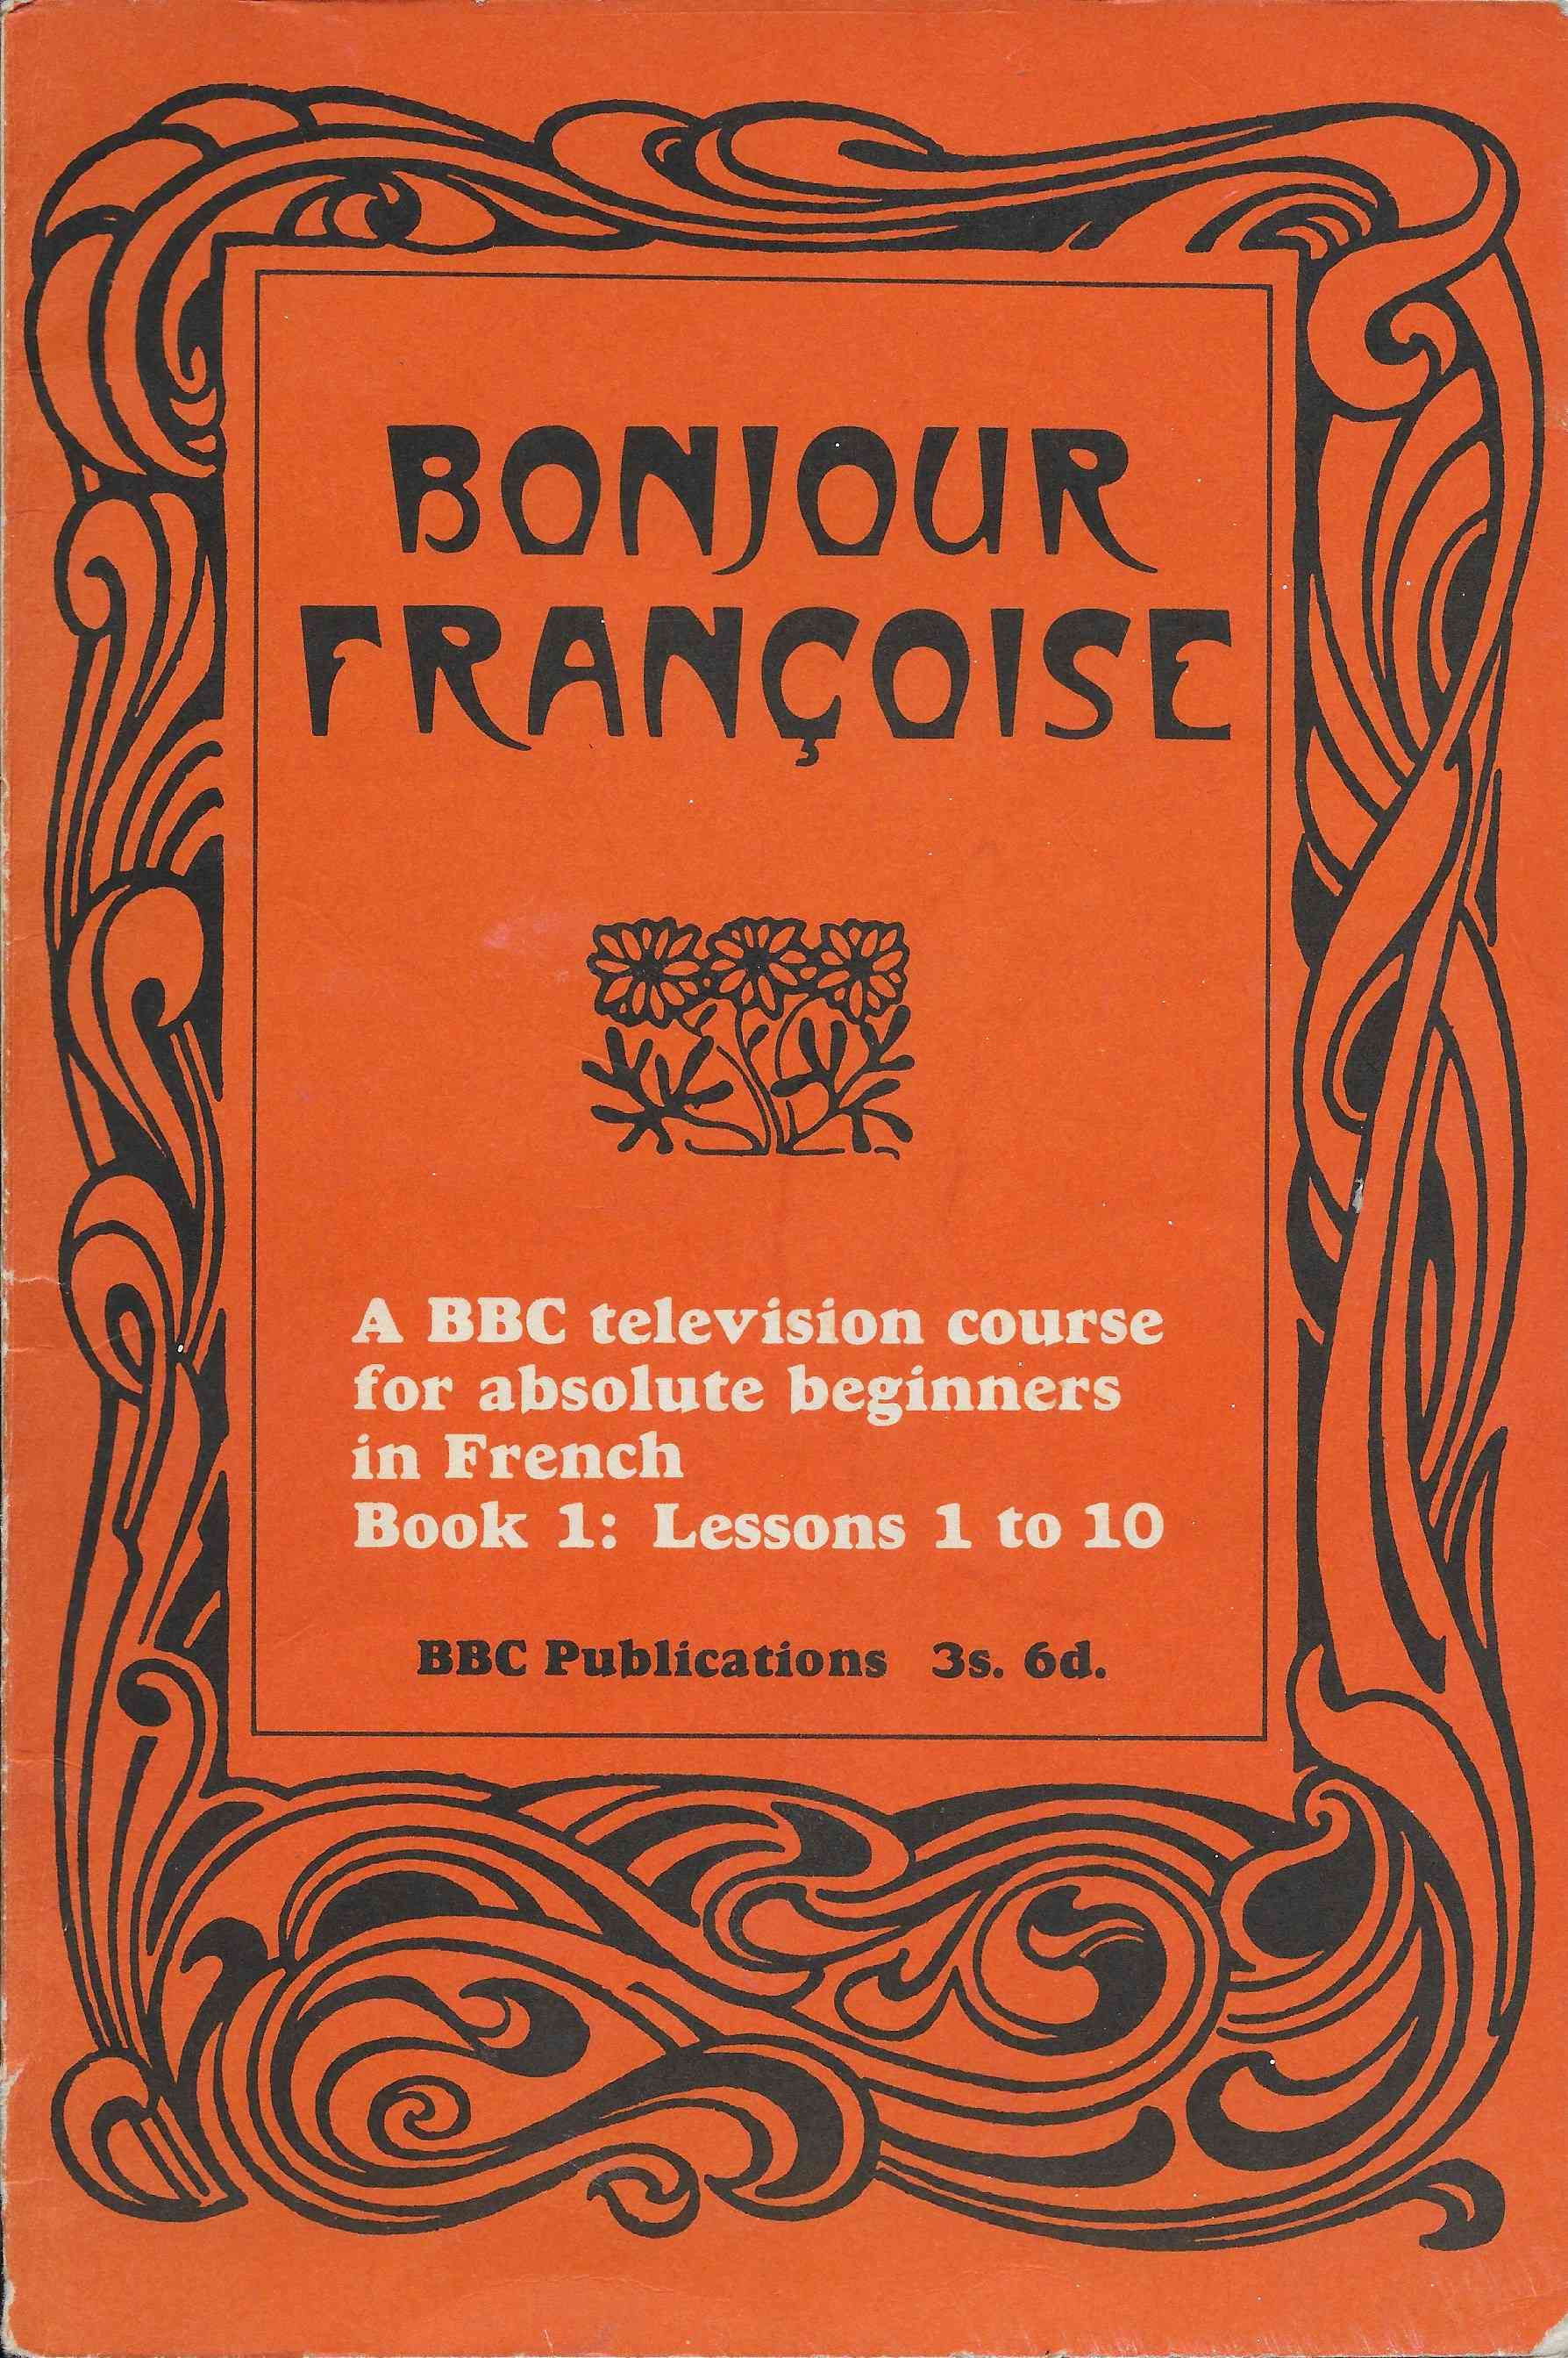 Picture of books-OP 41 Bonjour Francoise - Book 1 by artist Michel Faure from the BBC books - Records and Tapes library